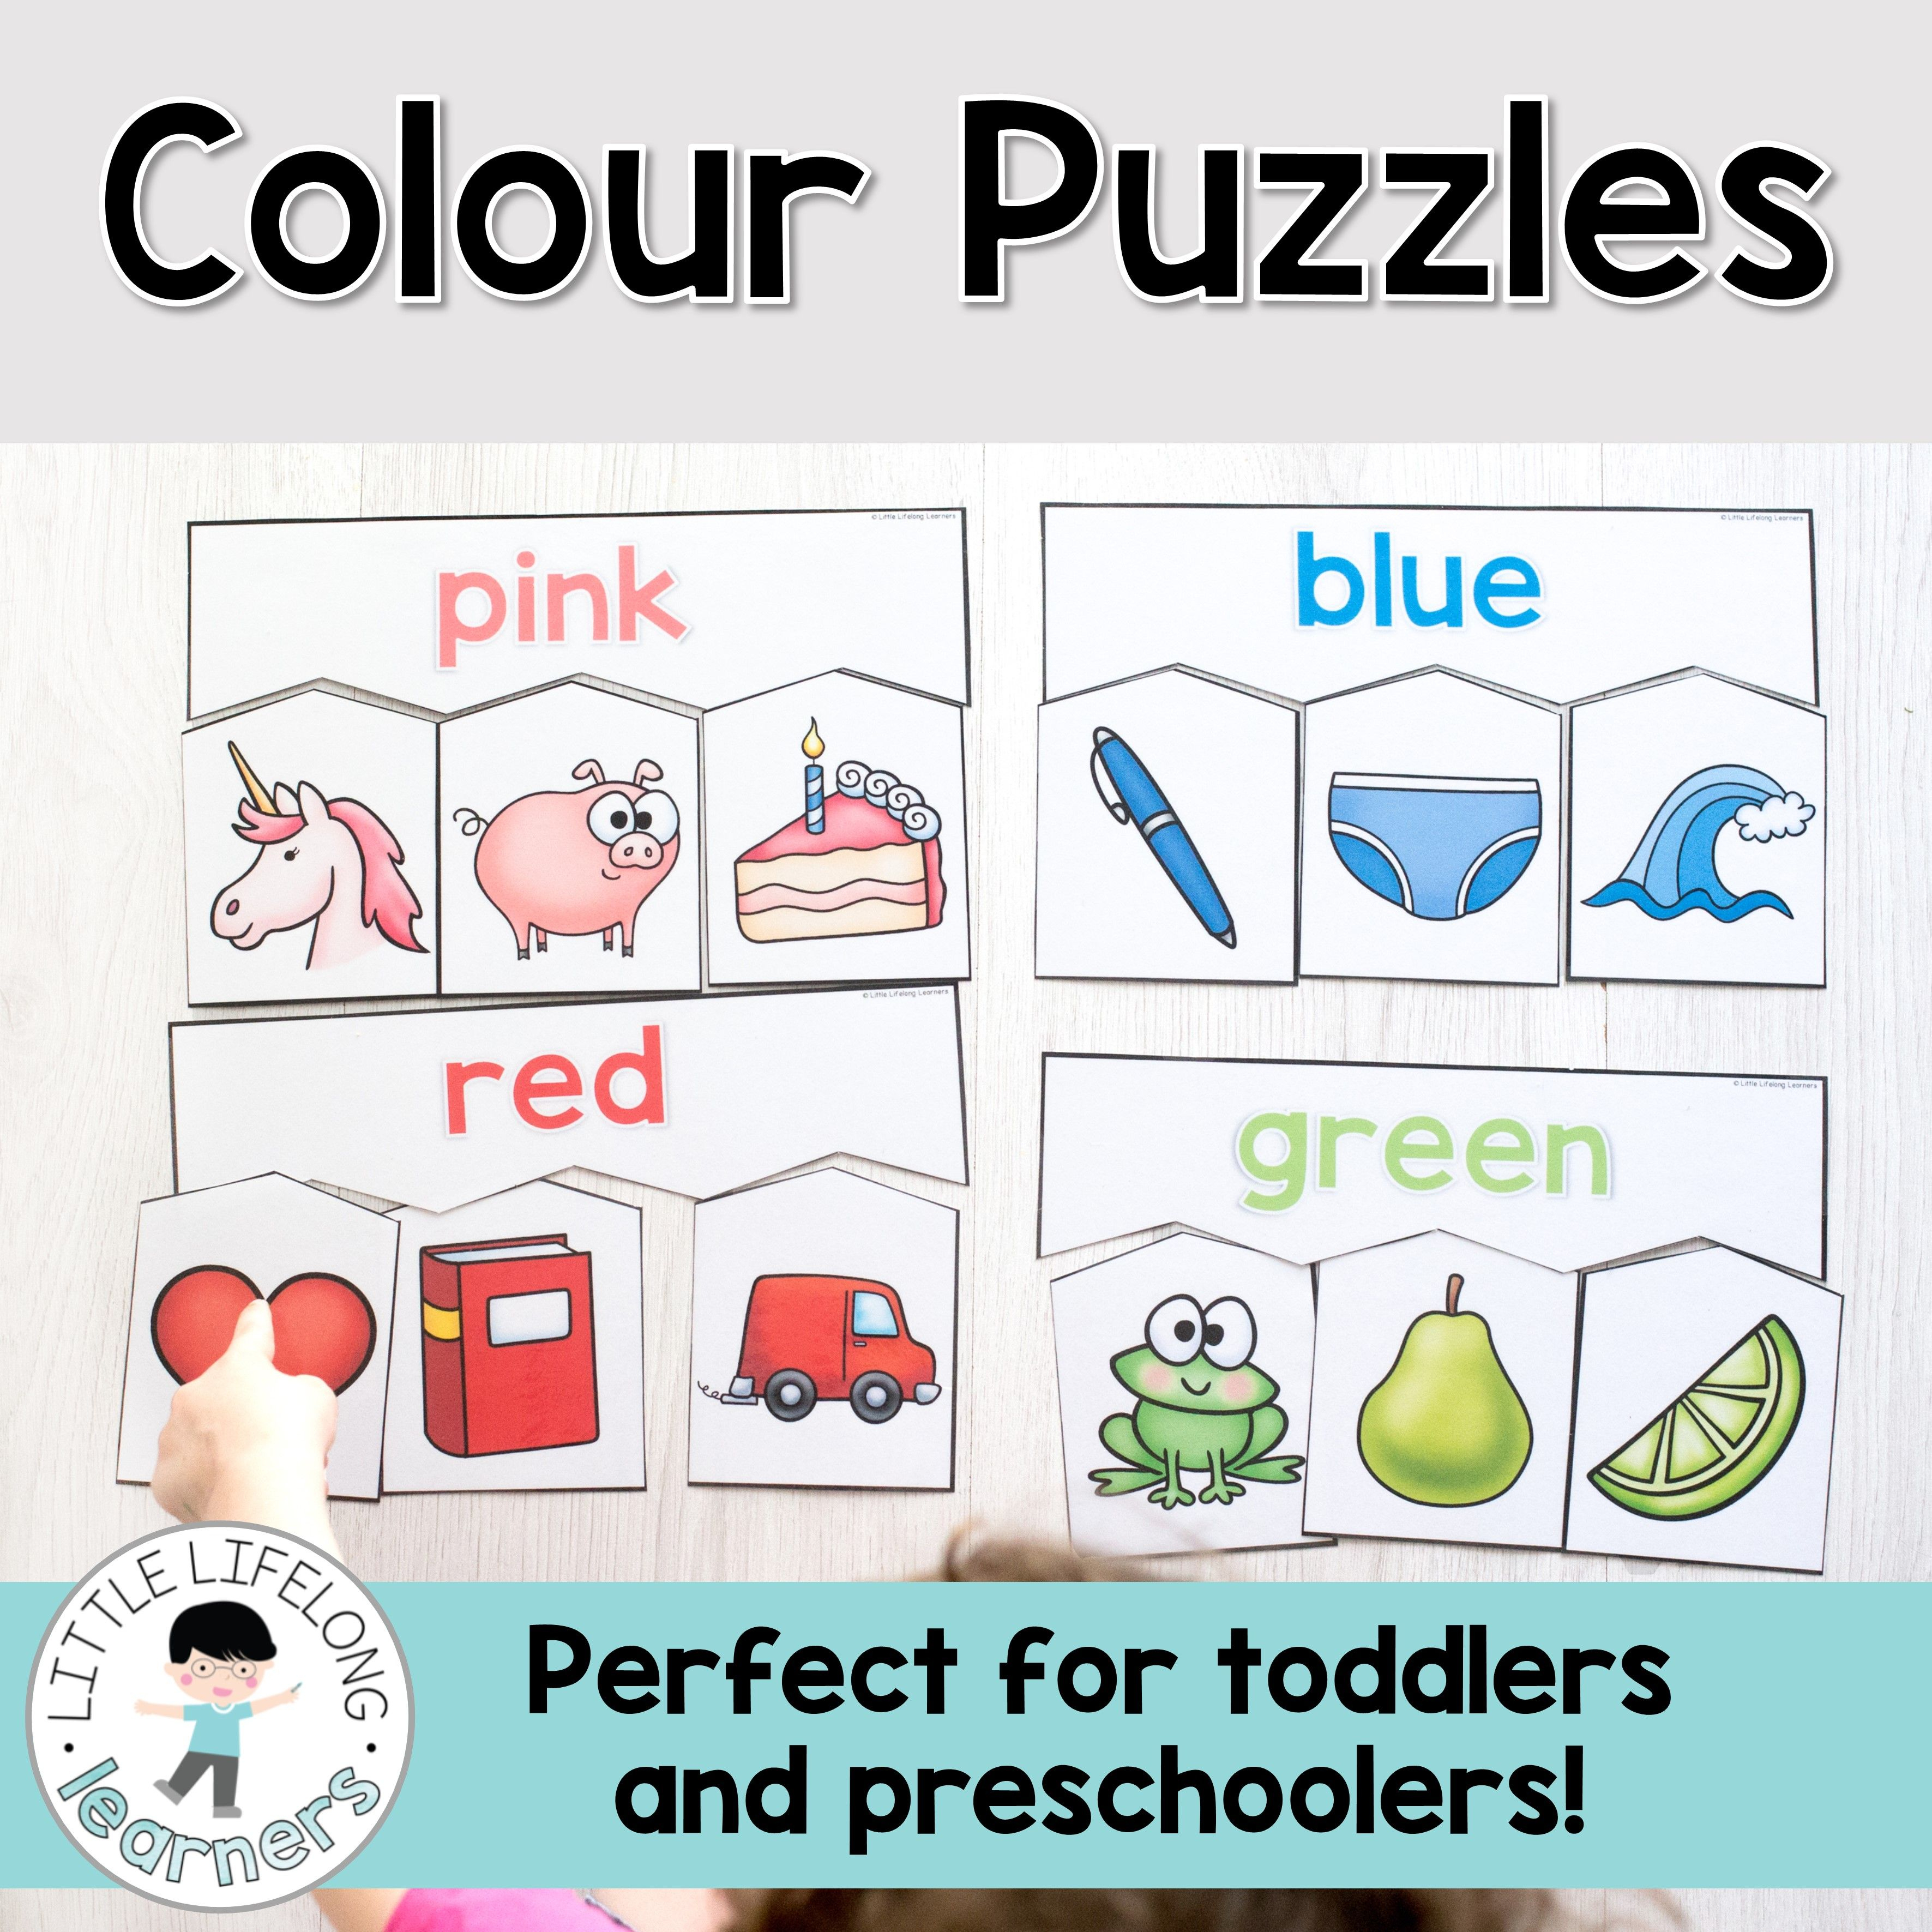 Colour Puzzles For Toddlers And Preschoolers | Toddler And - Printable Puzzle For 3 Year Old